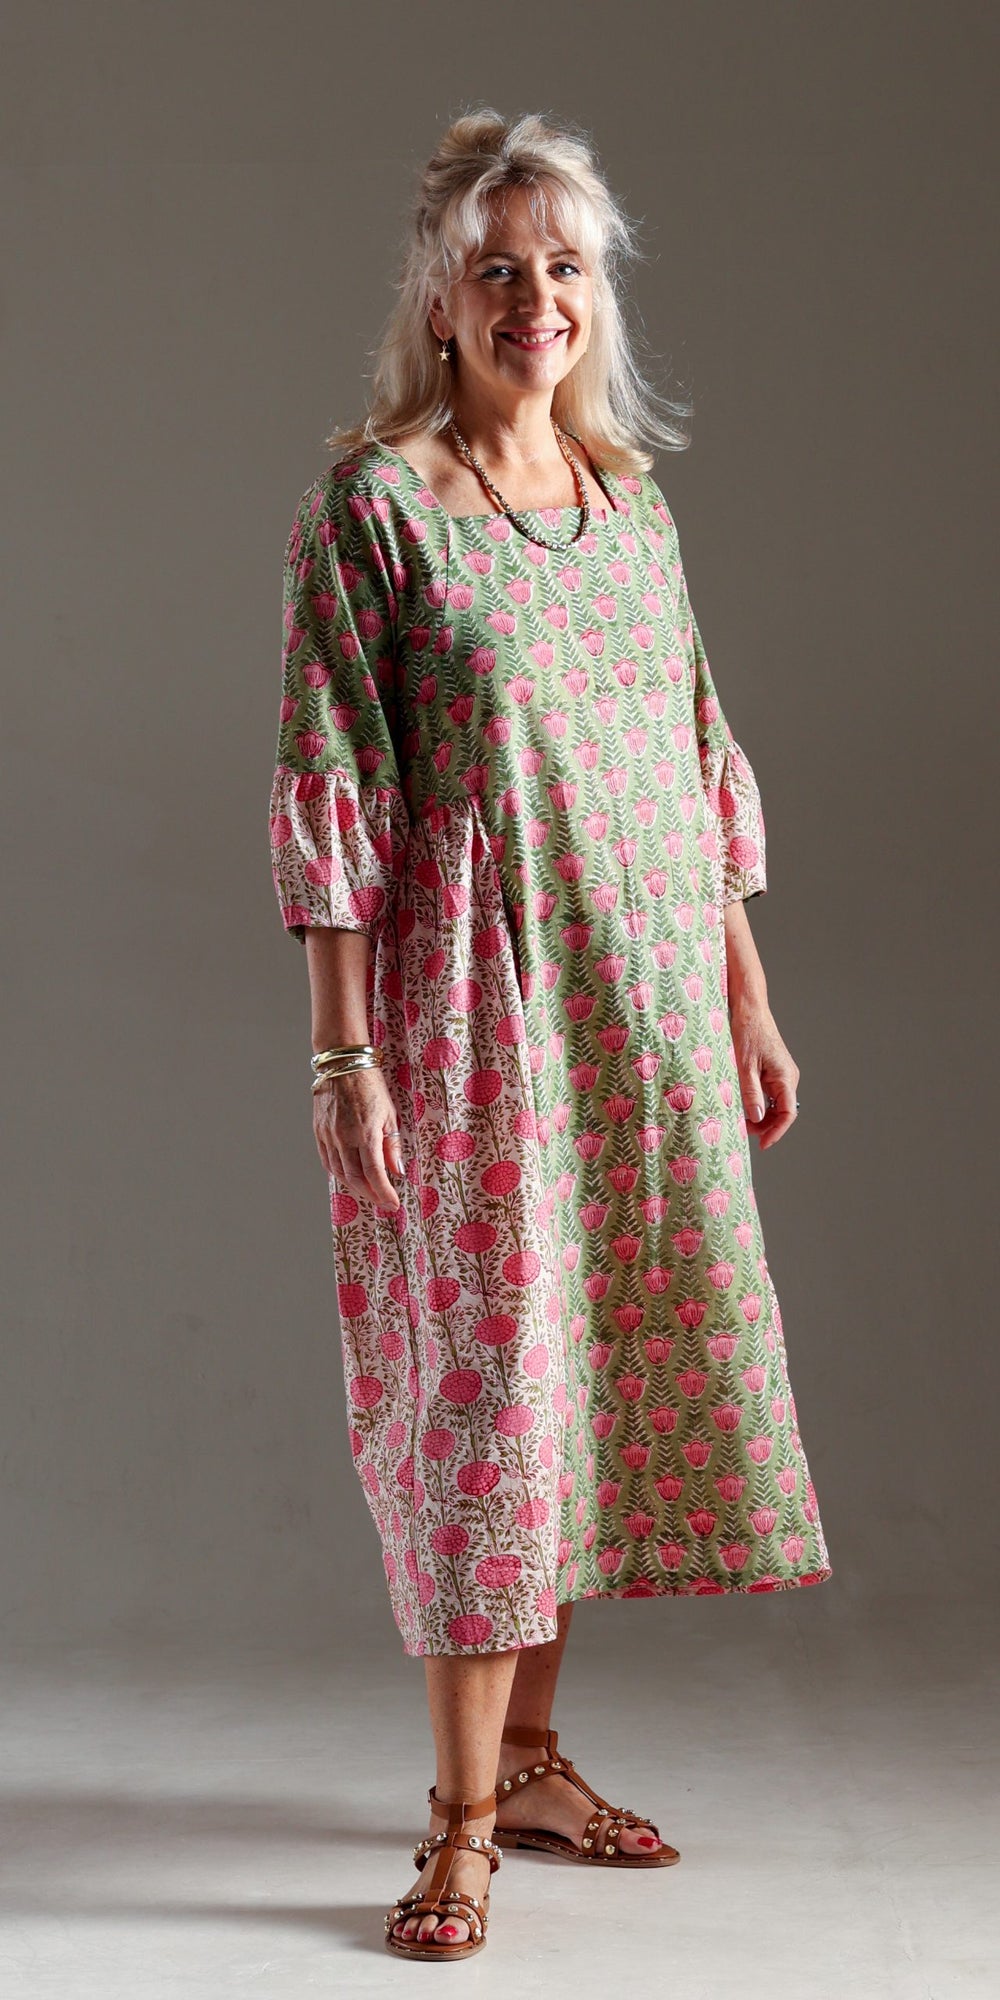 Woman wearing the Mahal Dress sewing pattern from Sew Different on The Fold Line. A dress pattern made in lightweight cotton, viscose, rayon, and lightweight linen fabrics, featuring a midi length, pull-on style, relaxed fit, gathered side panels, square 